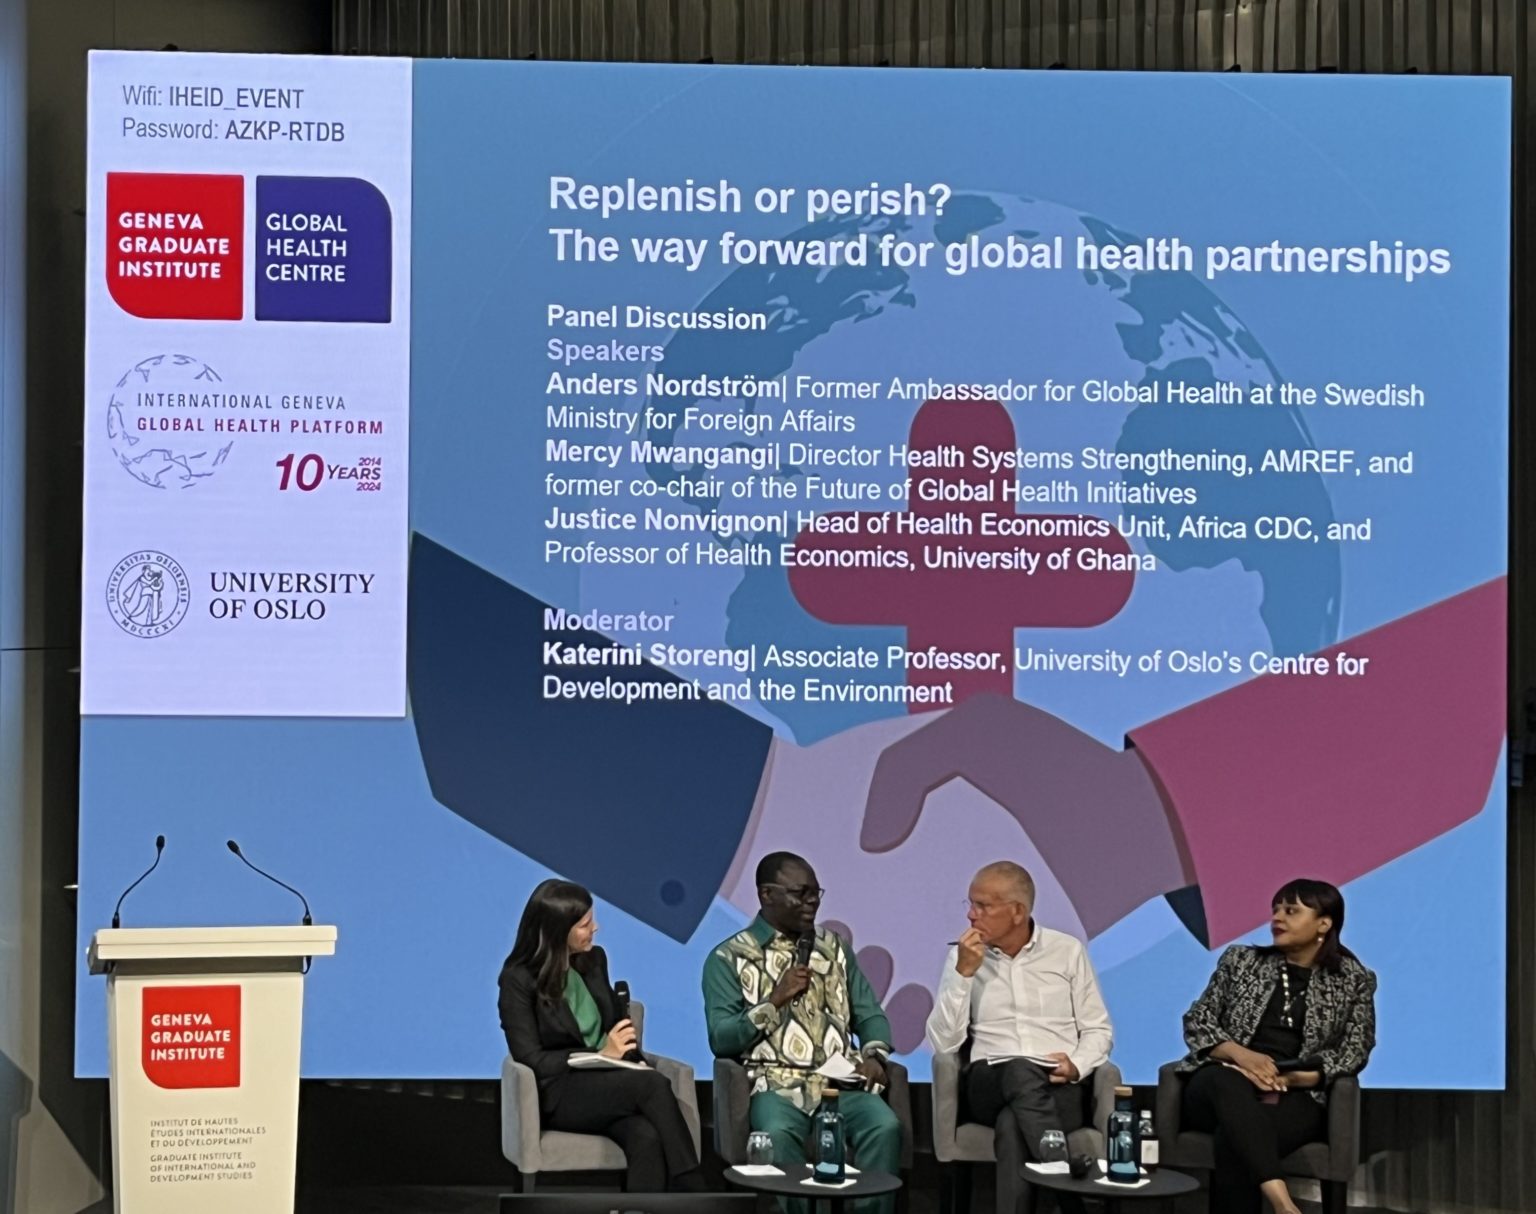 Health Policy Watch article highlights debate on the future of global health initiatives